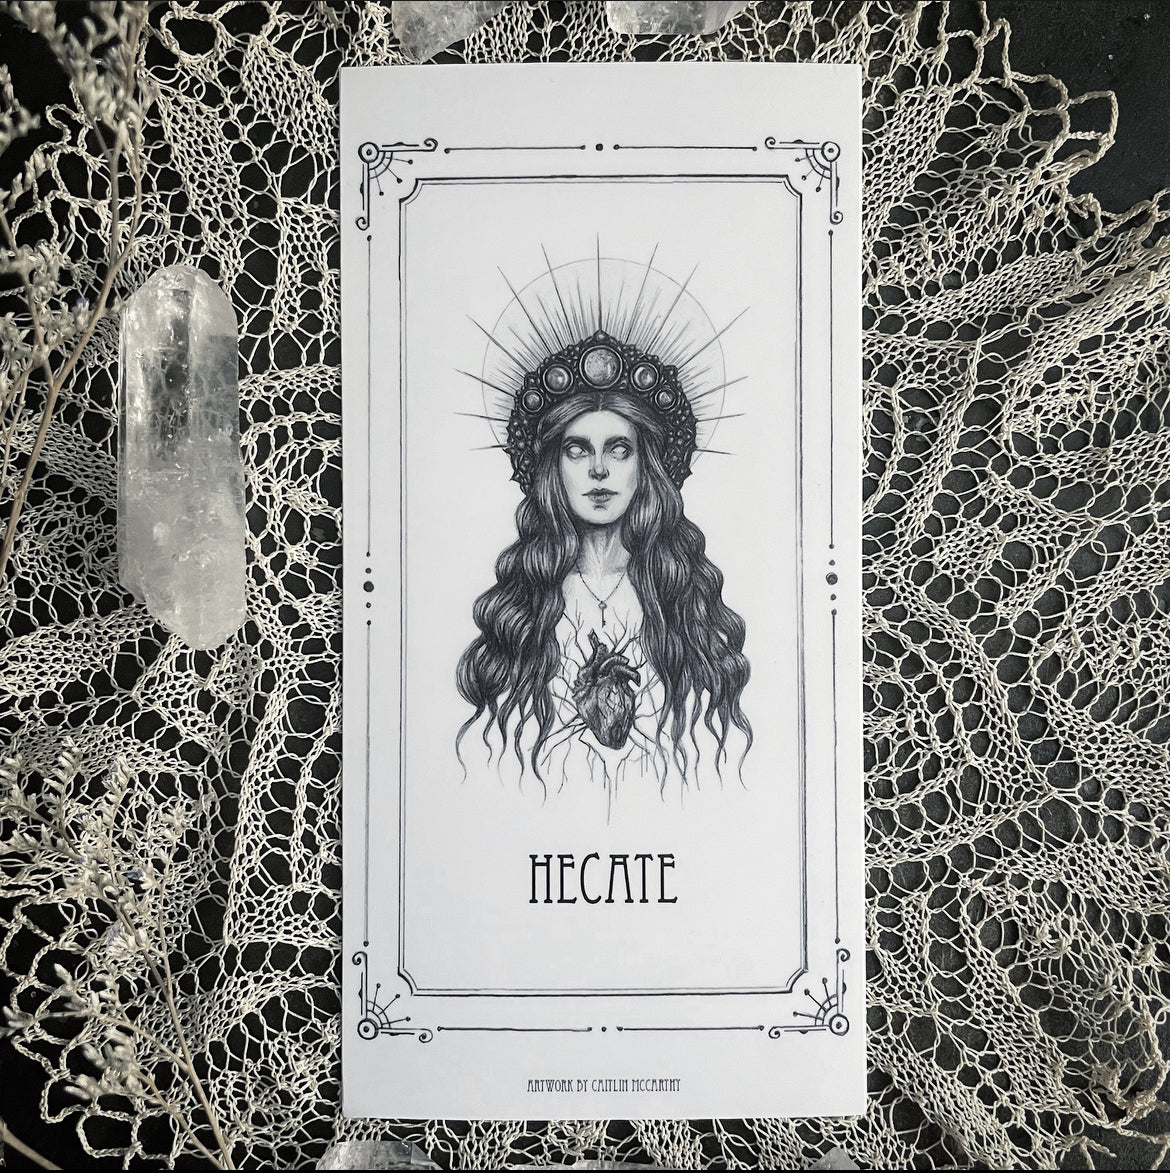 Hecate Devotional Candle Sticker - 3x6” High Quality Vinyl Sticker